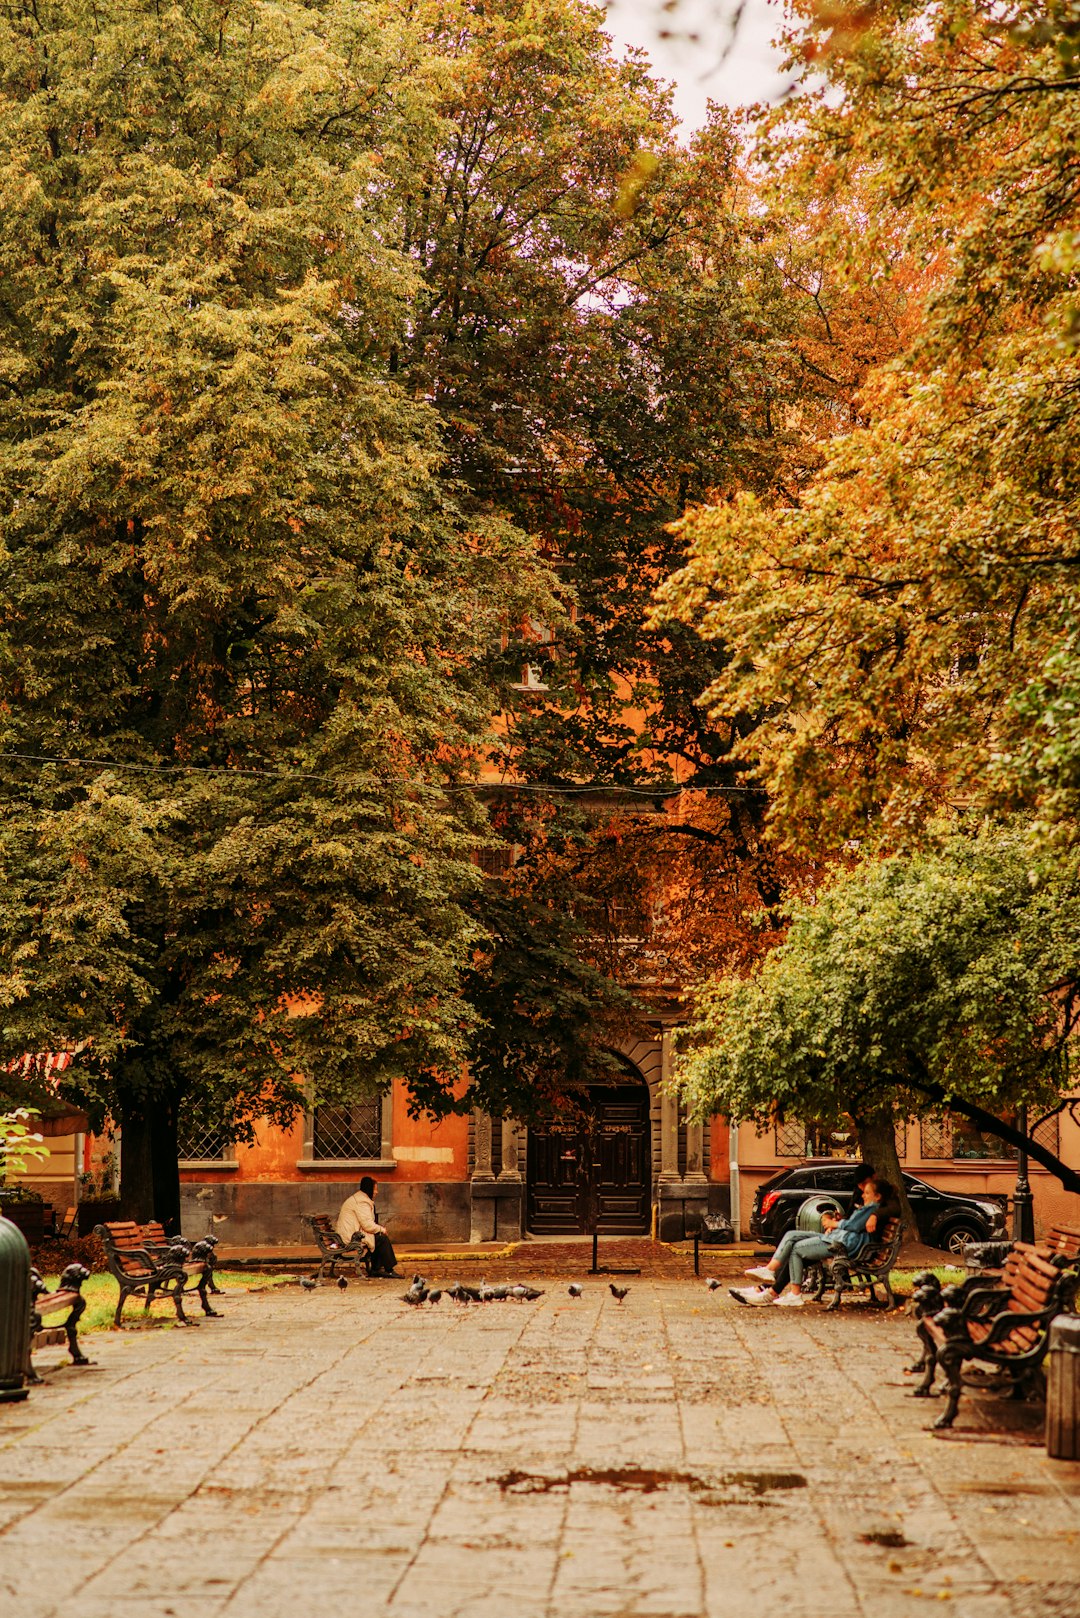 people sitting on bench near trees during daytime